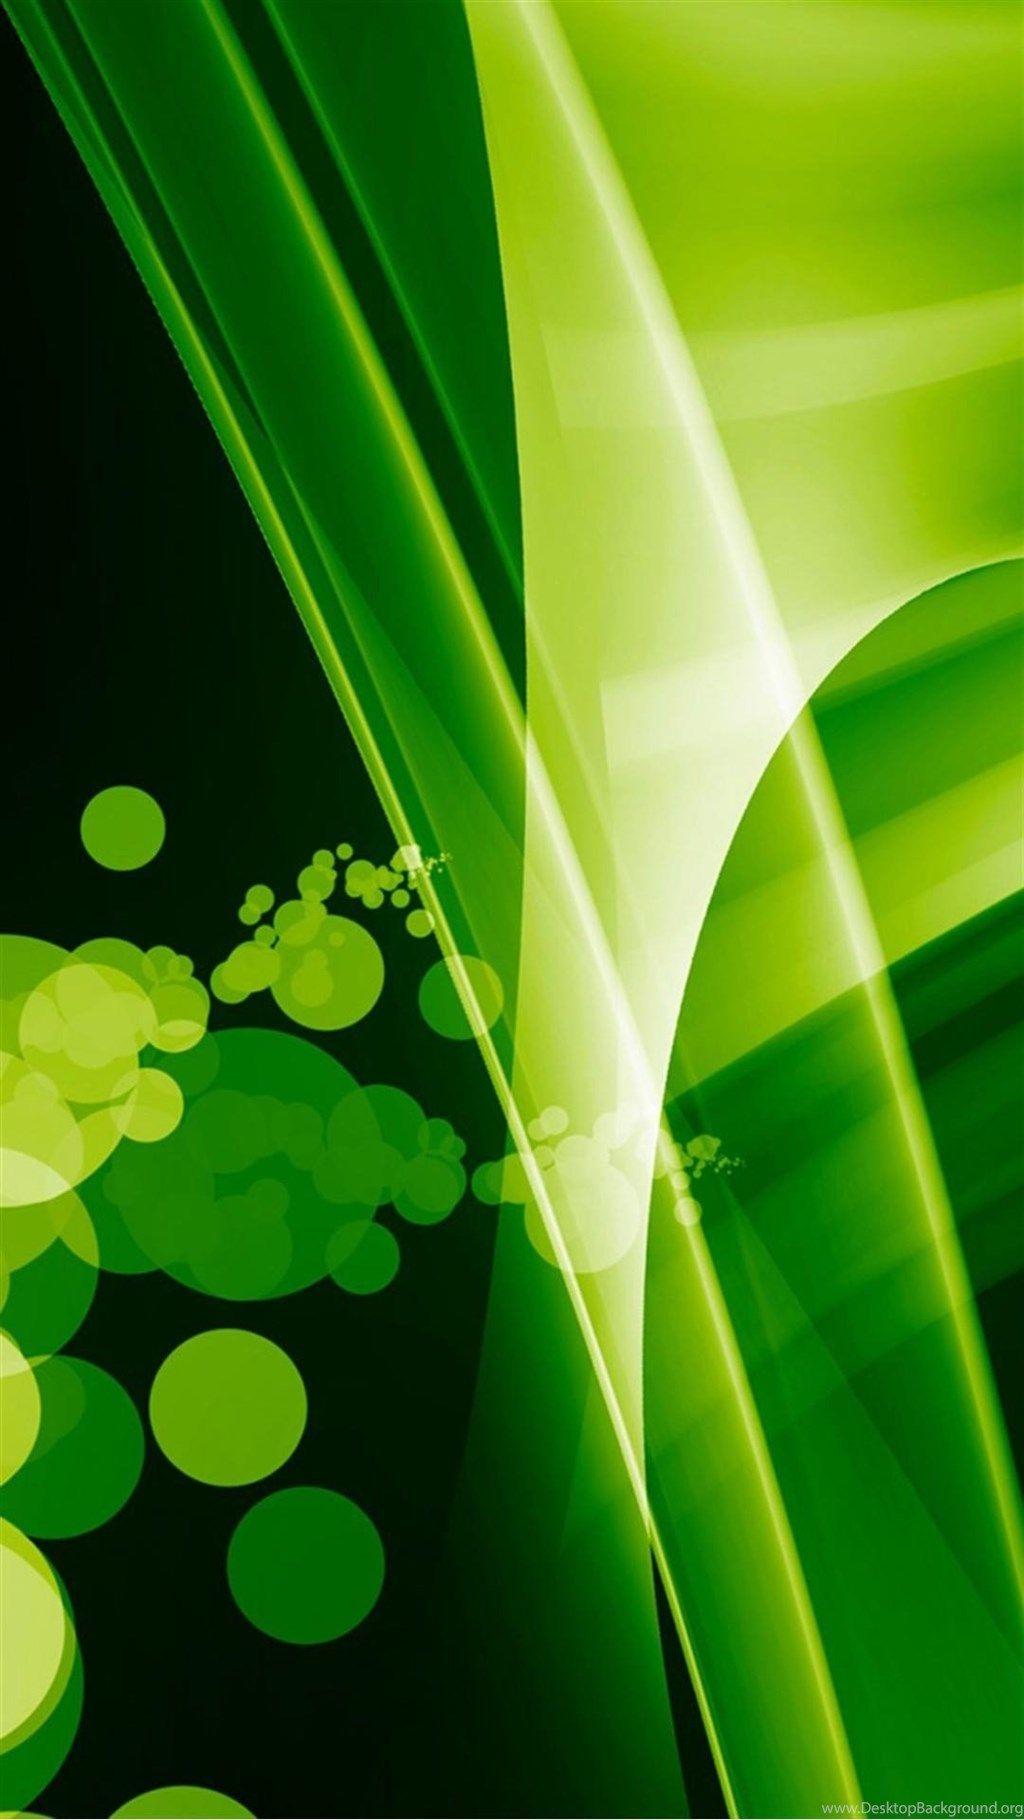 Oppo R7 Plus Wallpaper: Green Max Abstract Android Wallpaper